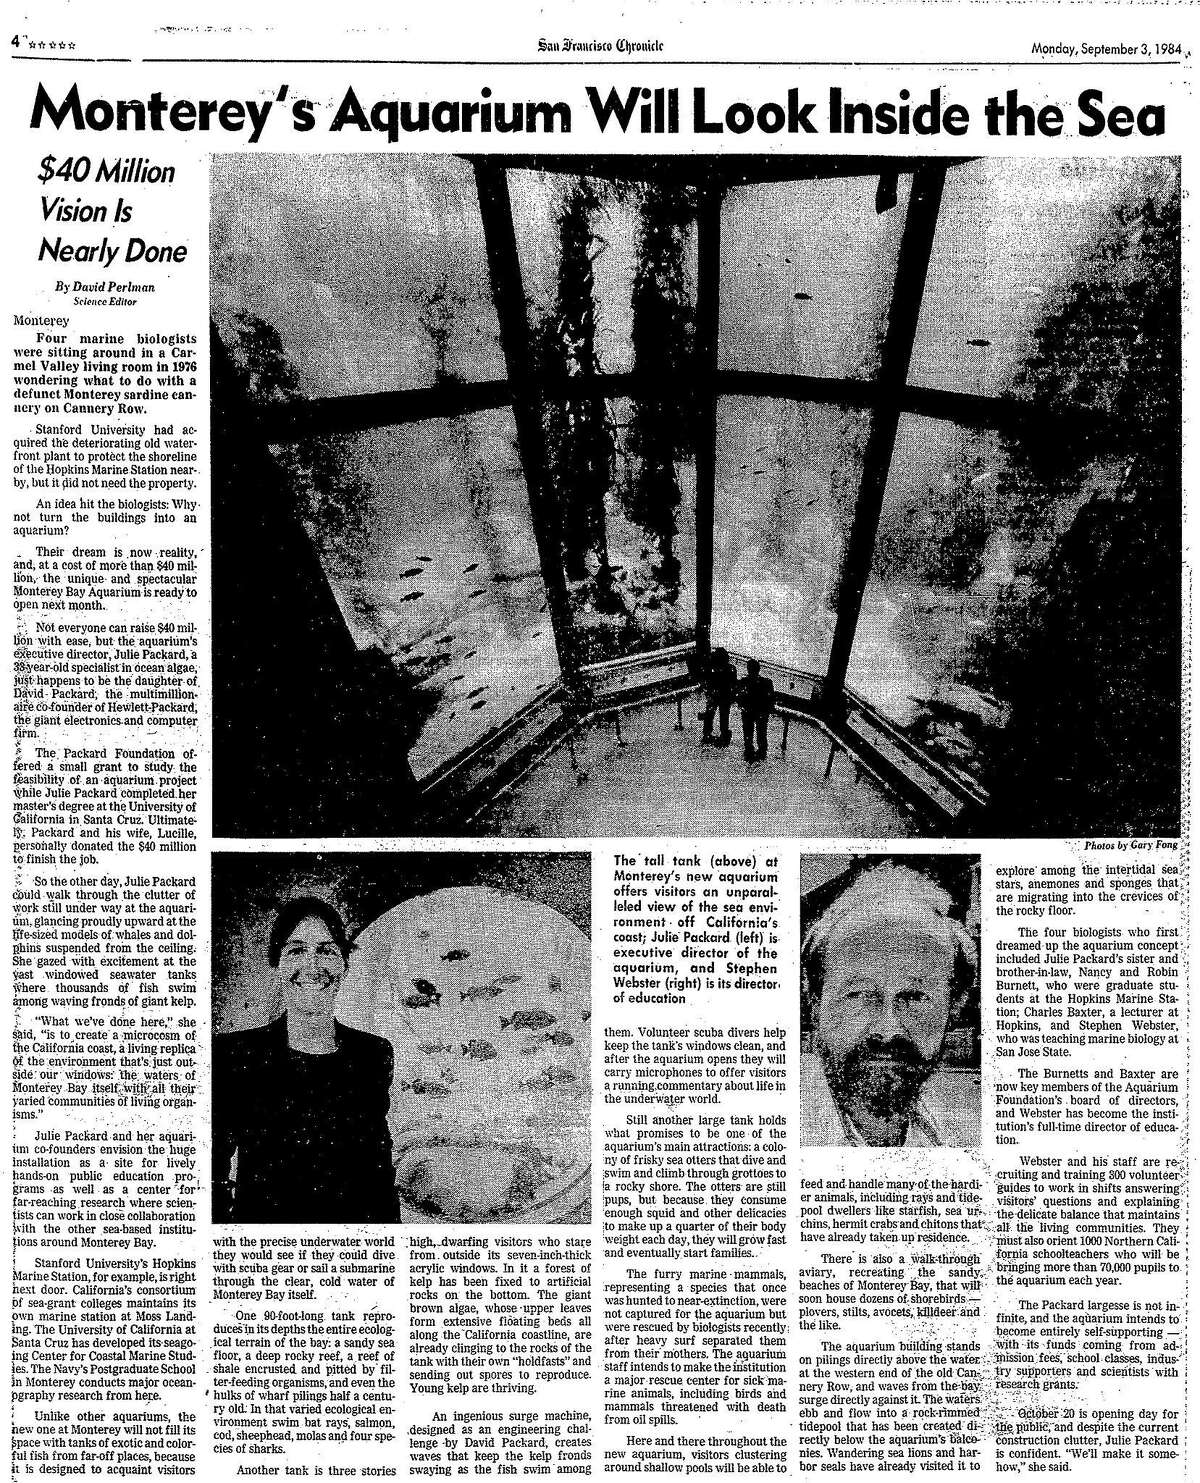 A Chronicle article dated September 3, 1984 previews the Monterey Bay Aquarium